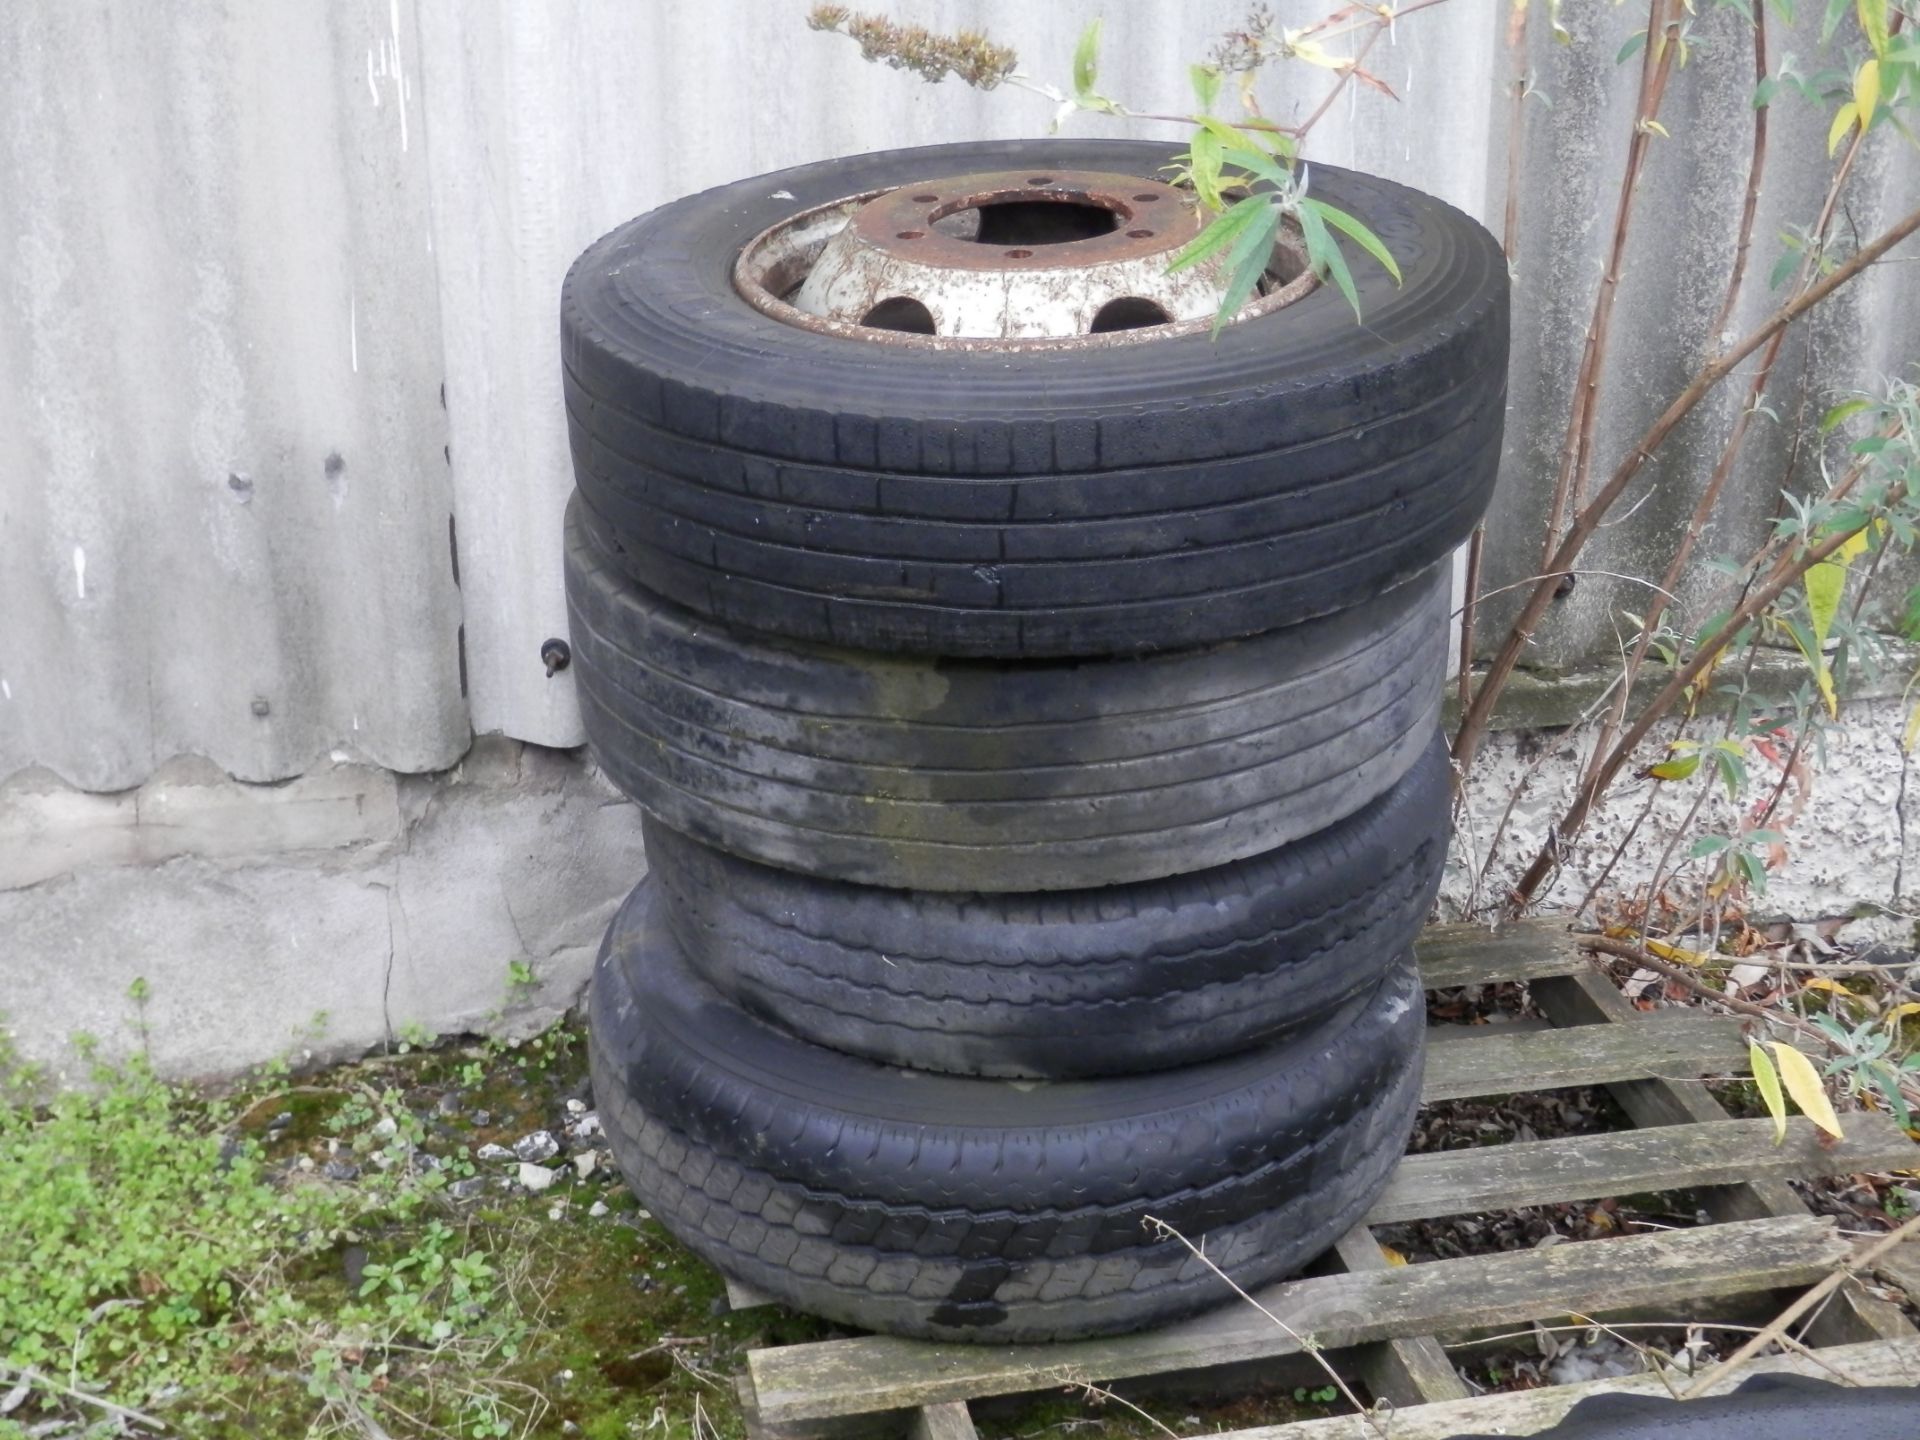 85 + ASSORTED LORRY, CAR & TRAILER TYRES & WHEELS, AS PICTURED. BUYER TO COLLECT COMPLETE - Image 5 of 10